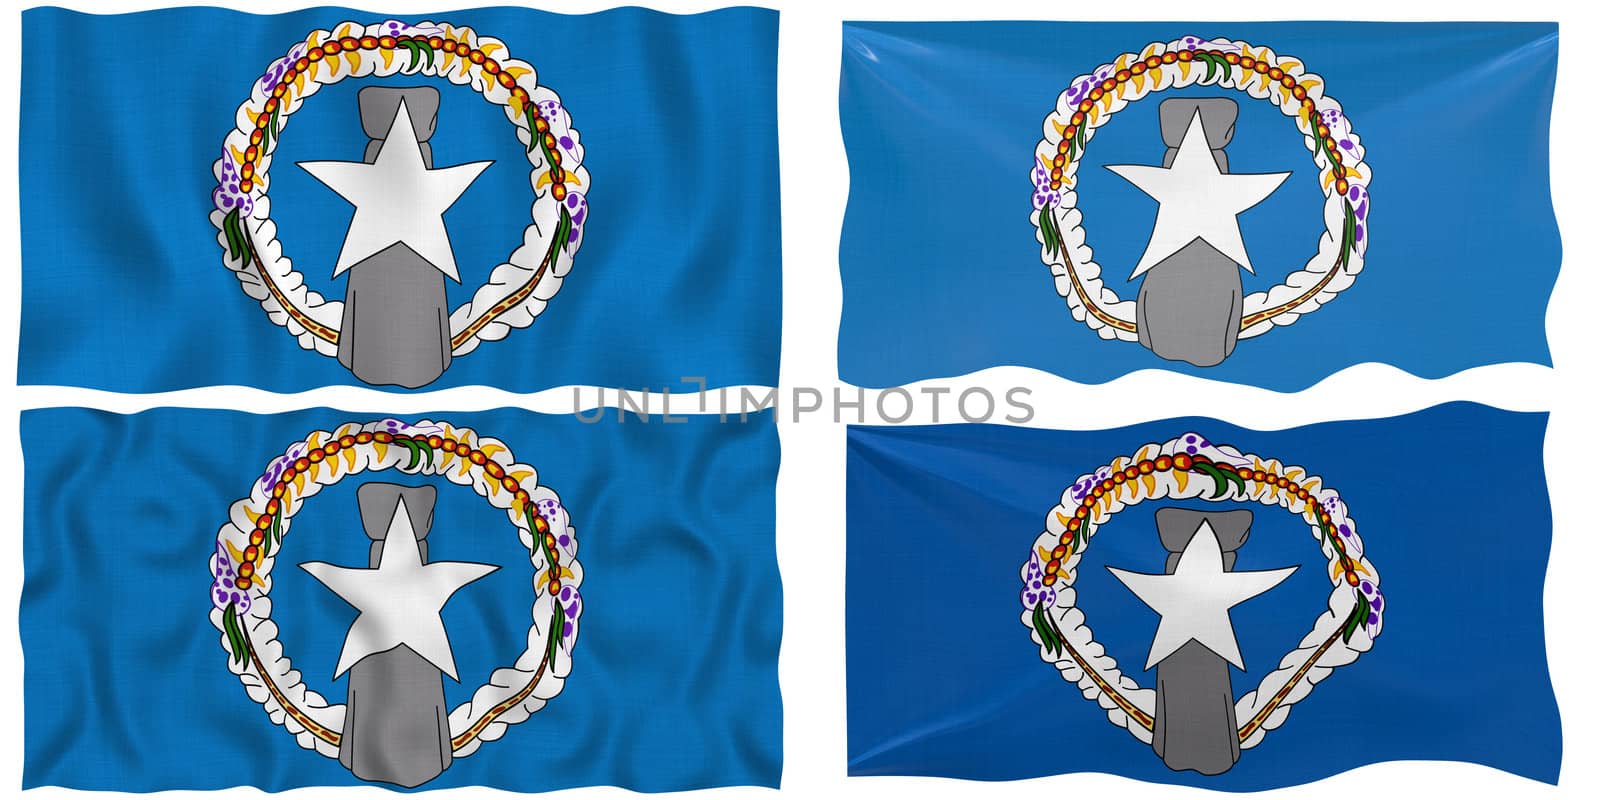 Flag of Northern Mariana Islands by clearviewstock